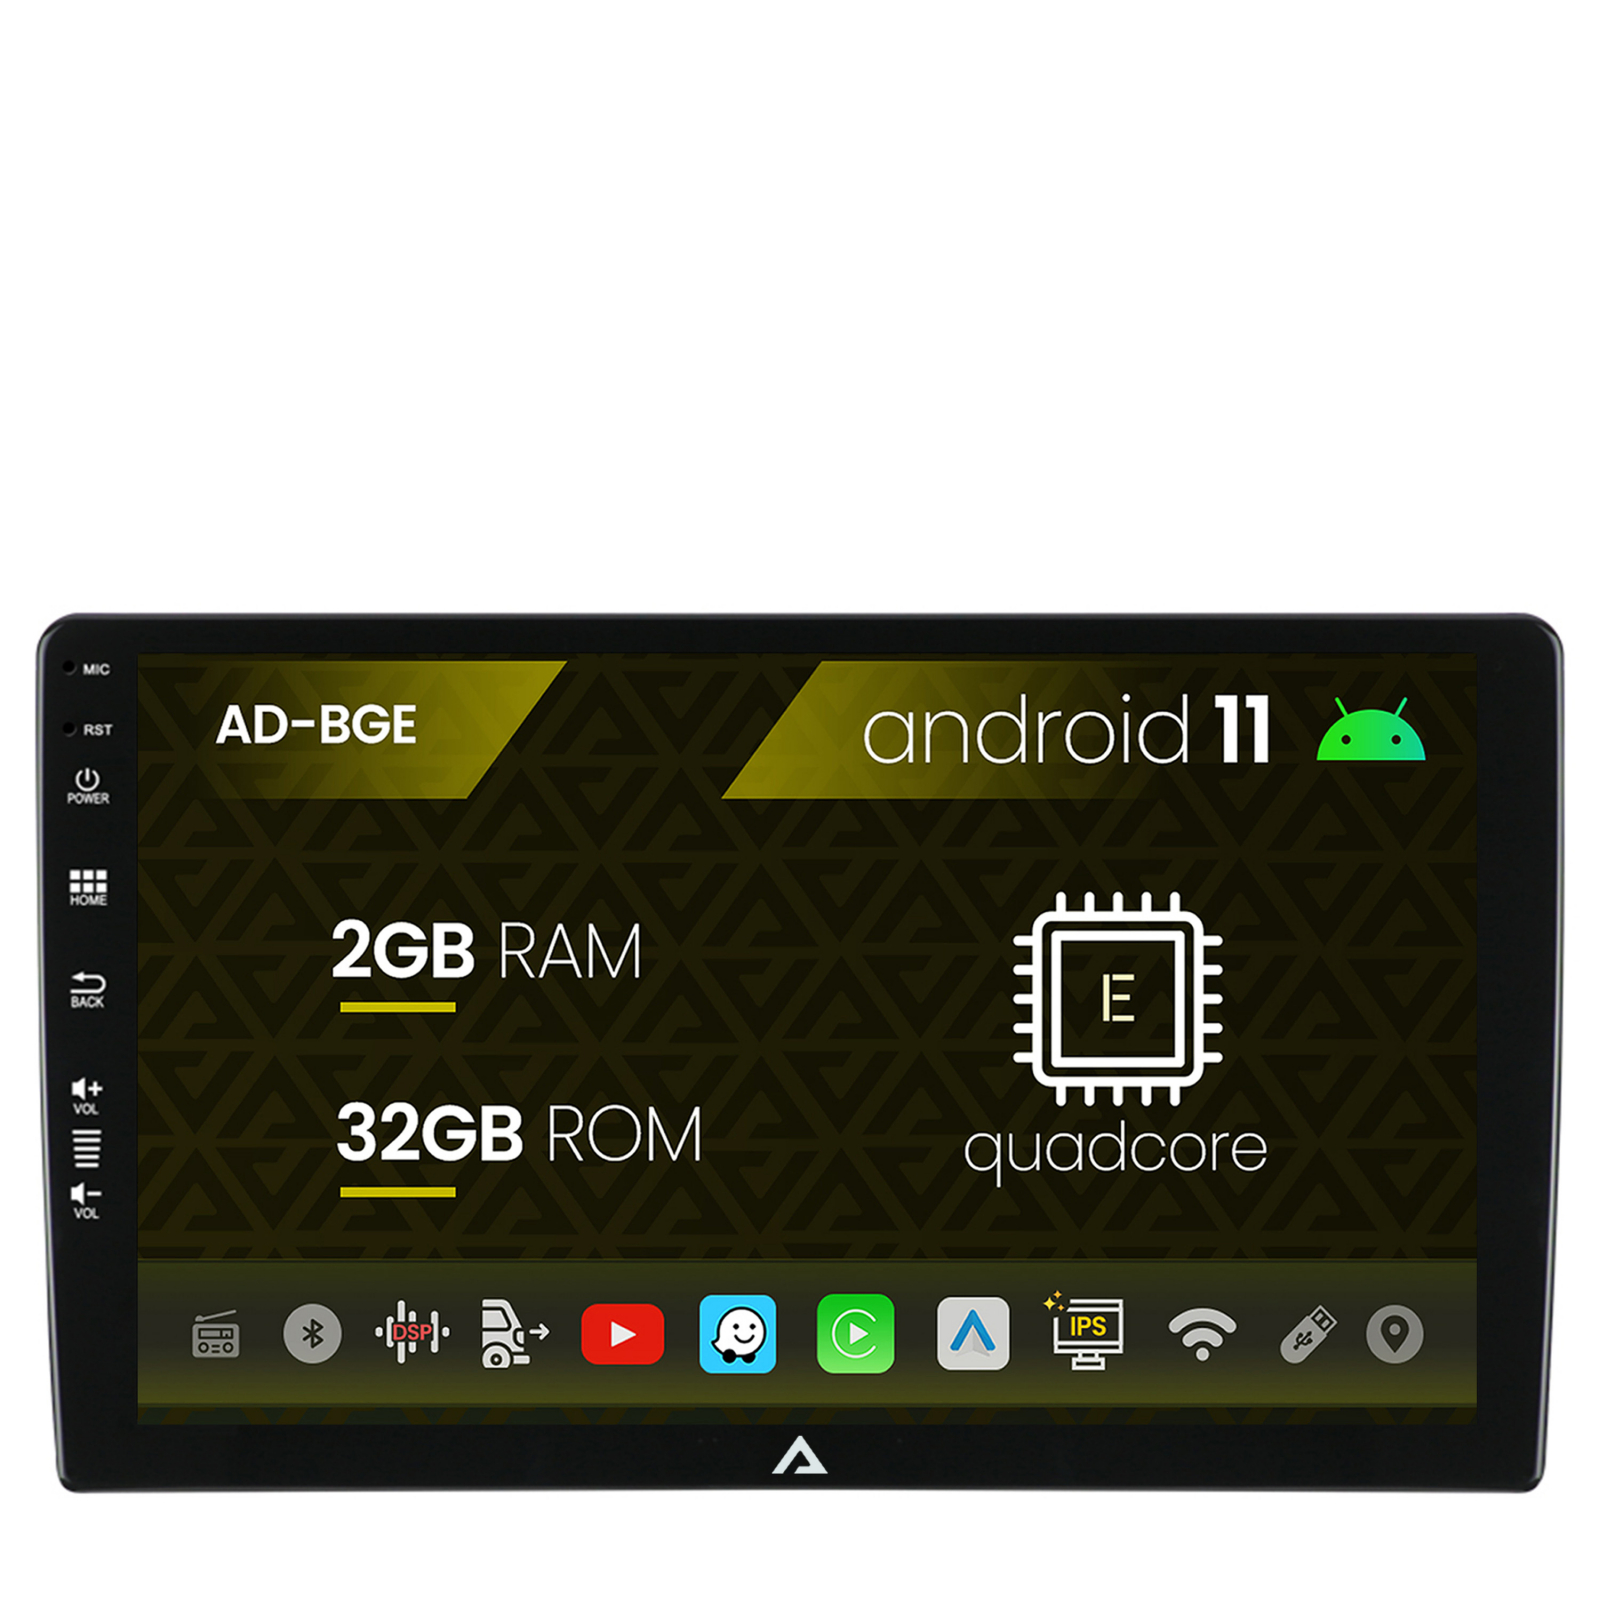 Navigatie All-in-one Universala, Android 10, E-Quadcore / 2GB RAM + 32GB ROM, 10.1 Inch - AD-BGE10002